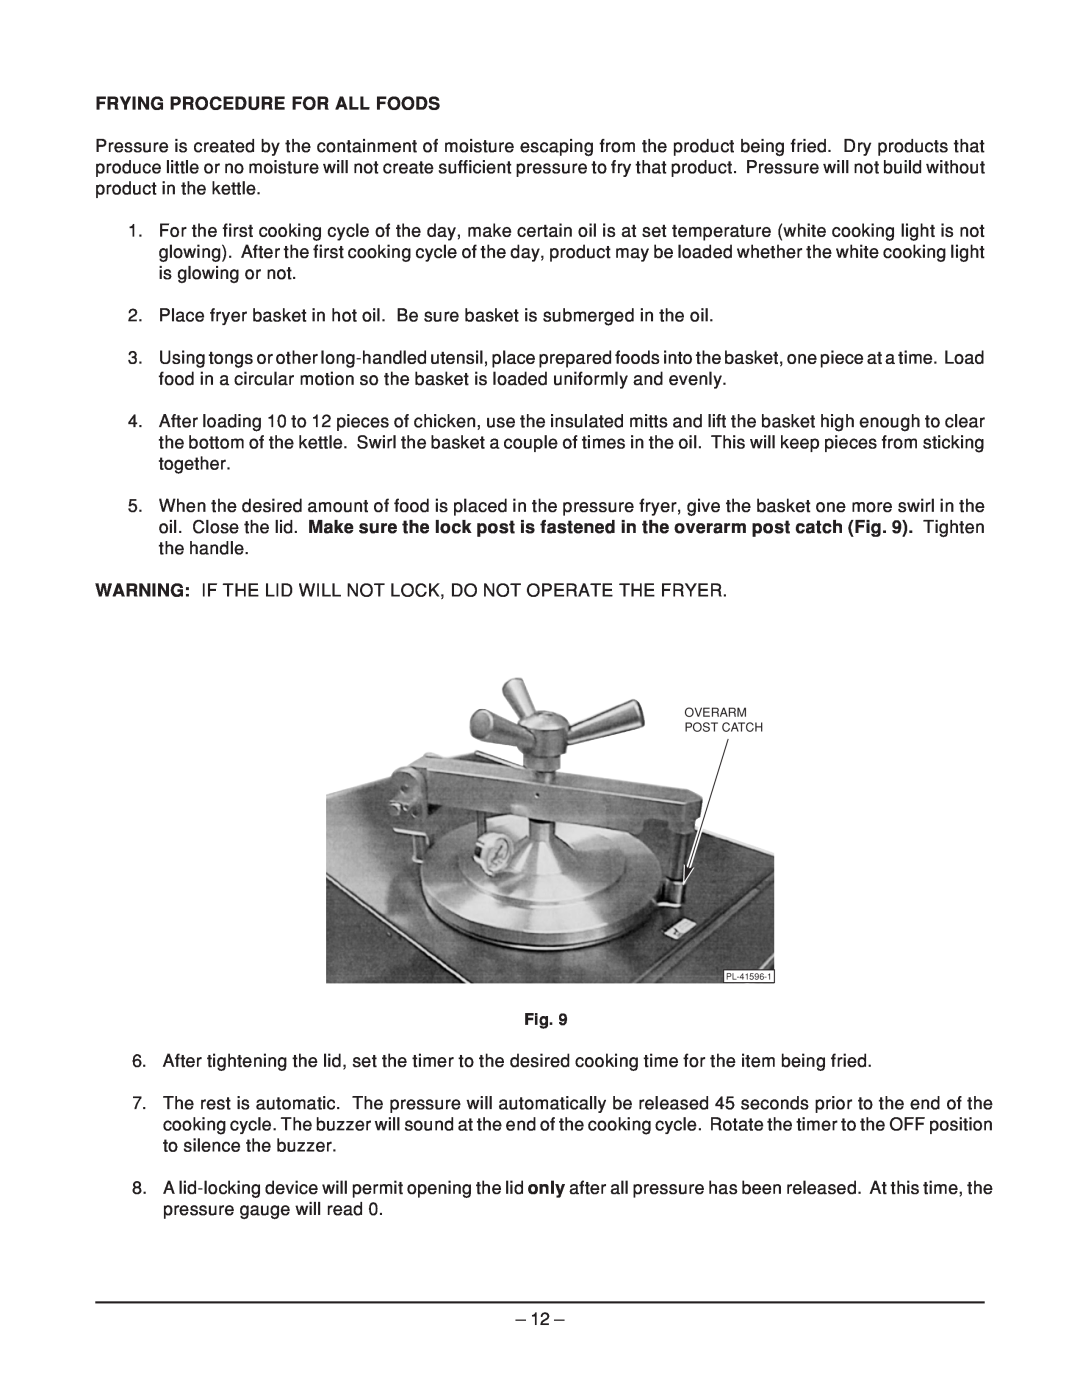 Hobart HPGF15 manual Frying Procedure For All Foods 